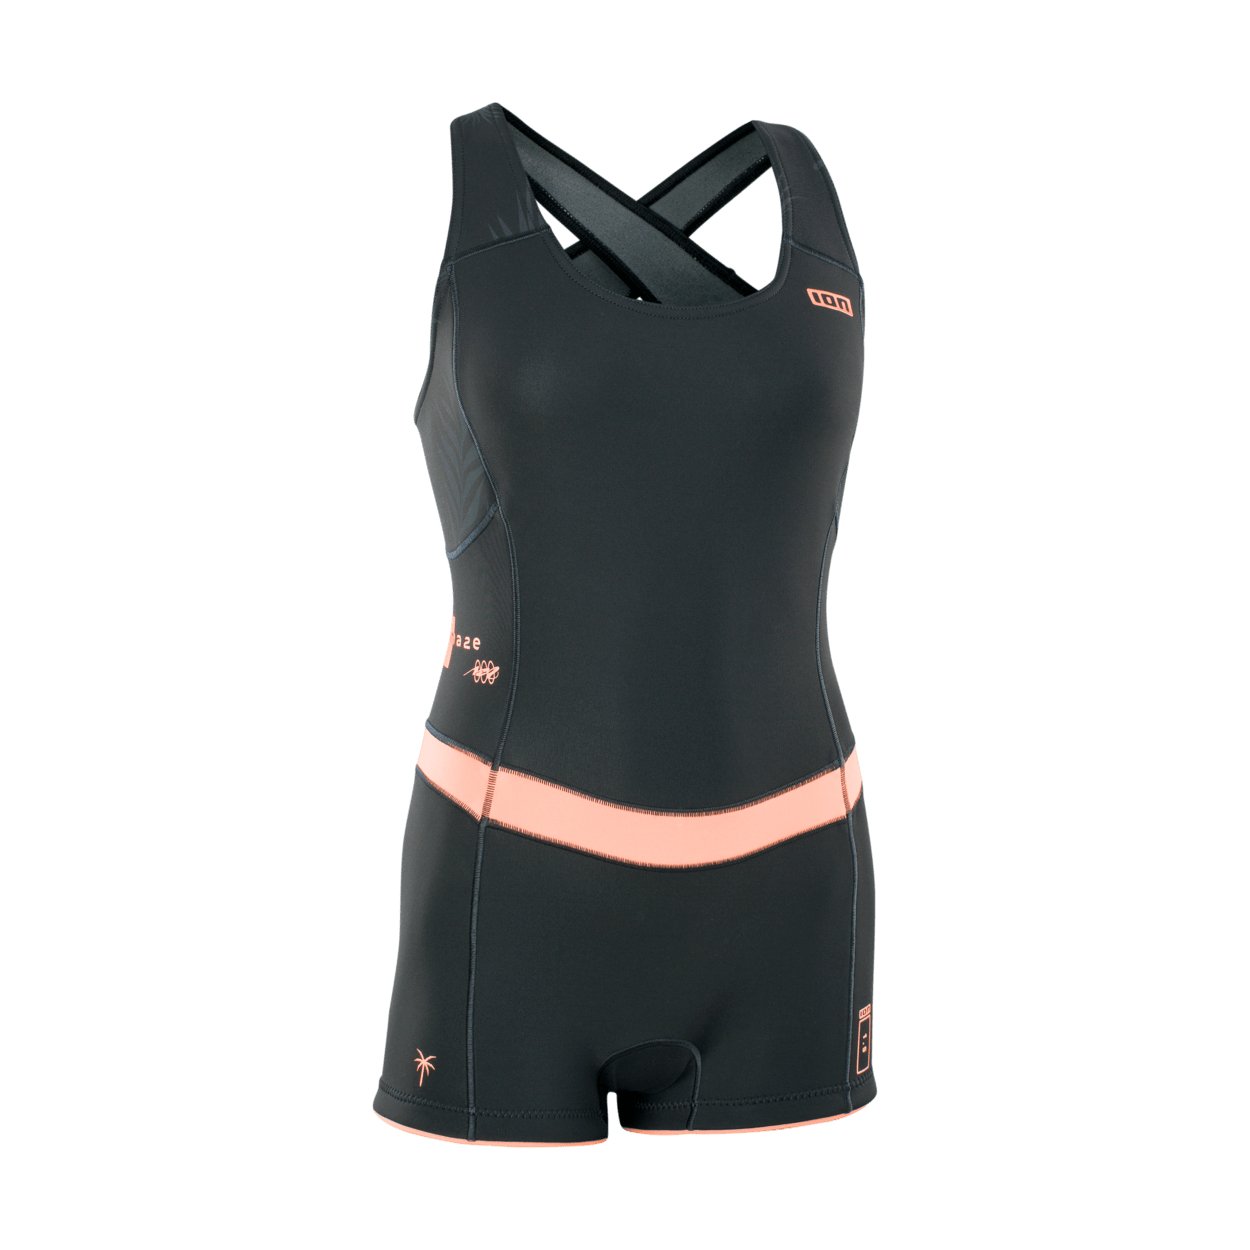 ION Women Wetsuit Amaze Shorty Crossback 1.5 2023 - Worthing Watersports - 9010583058344 - Wetsuits - ION Water